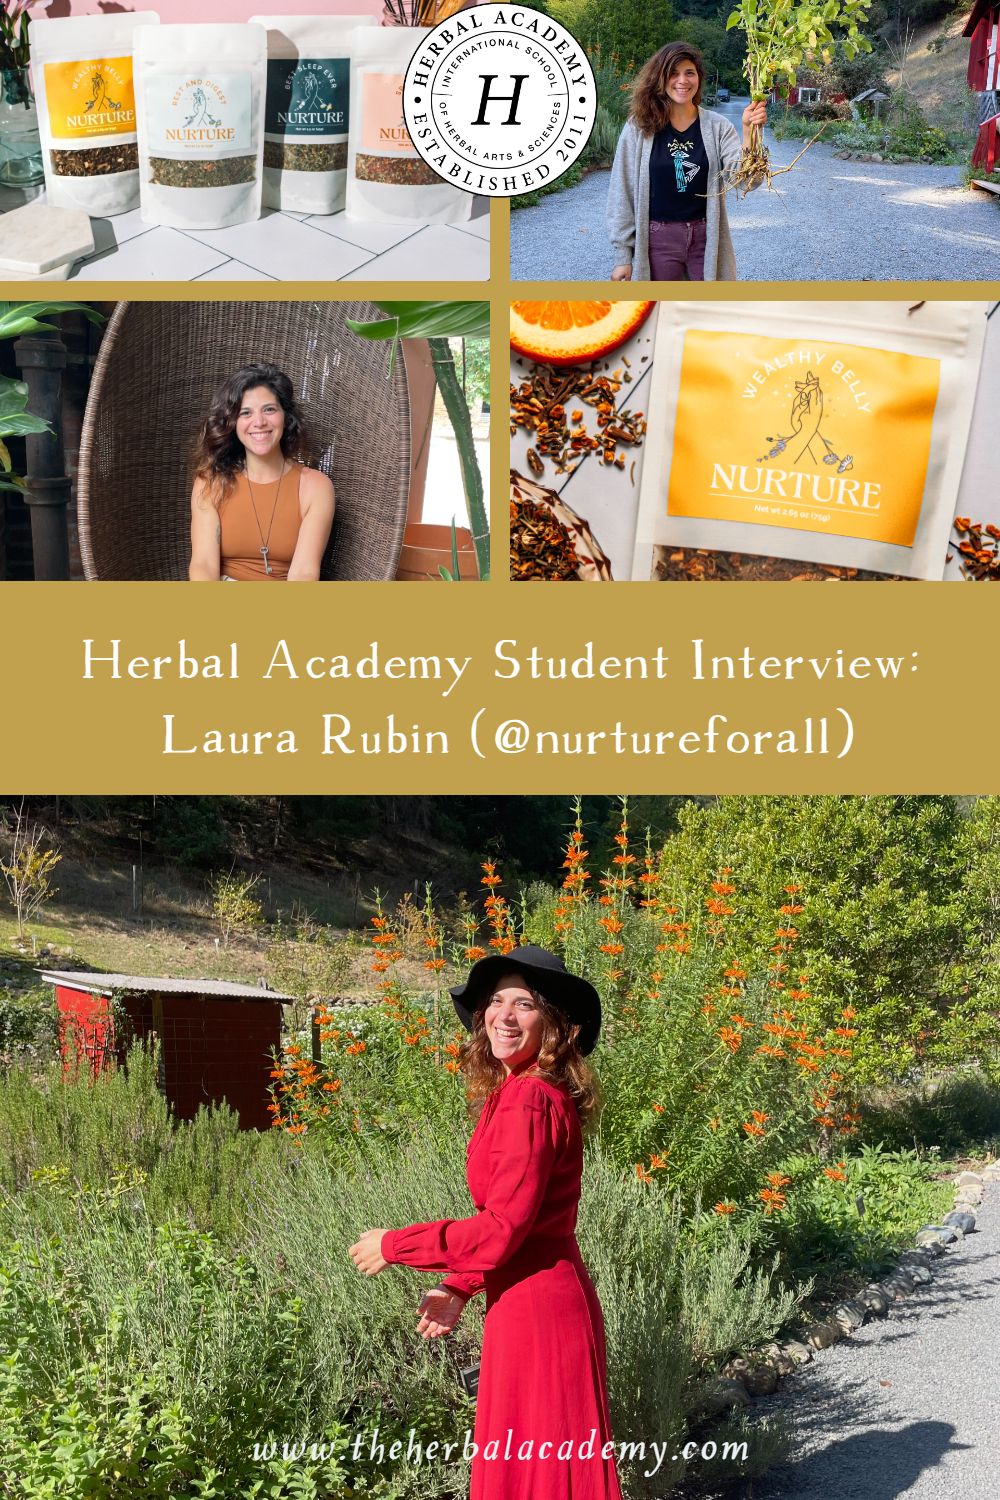 Herbal Academy Student Interview: Laura Rubin (@nurtureforall) | Herbal Academy | In this interview, we spoke with Laura Rubin, founder of Nurture, which empowers you to live more joyfully through the amazing power of herbs.